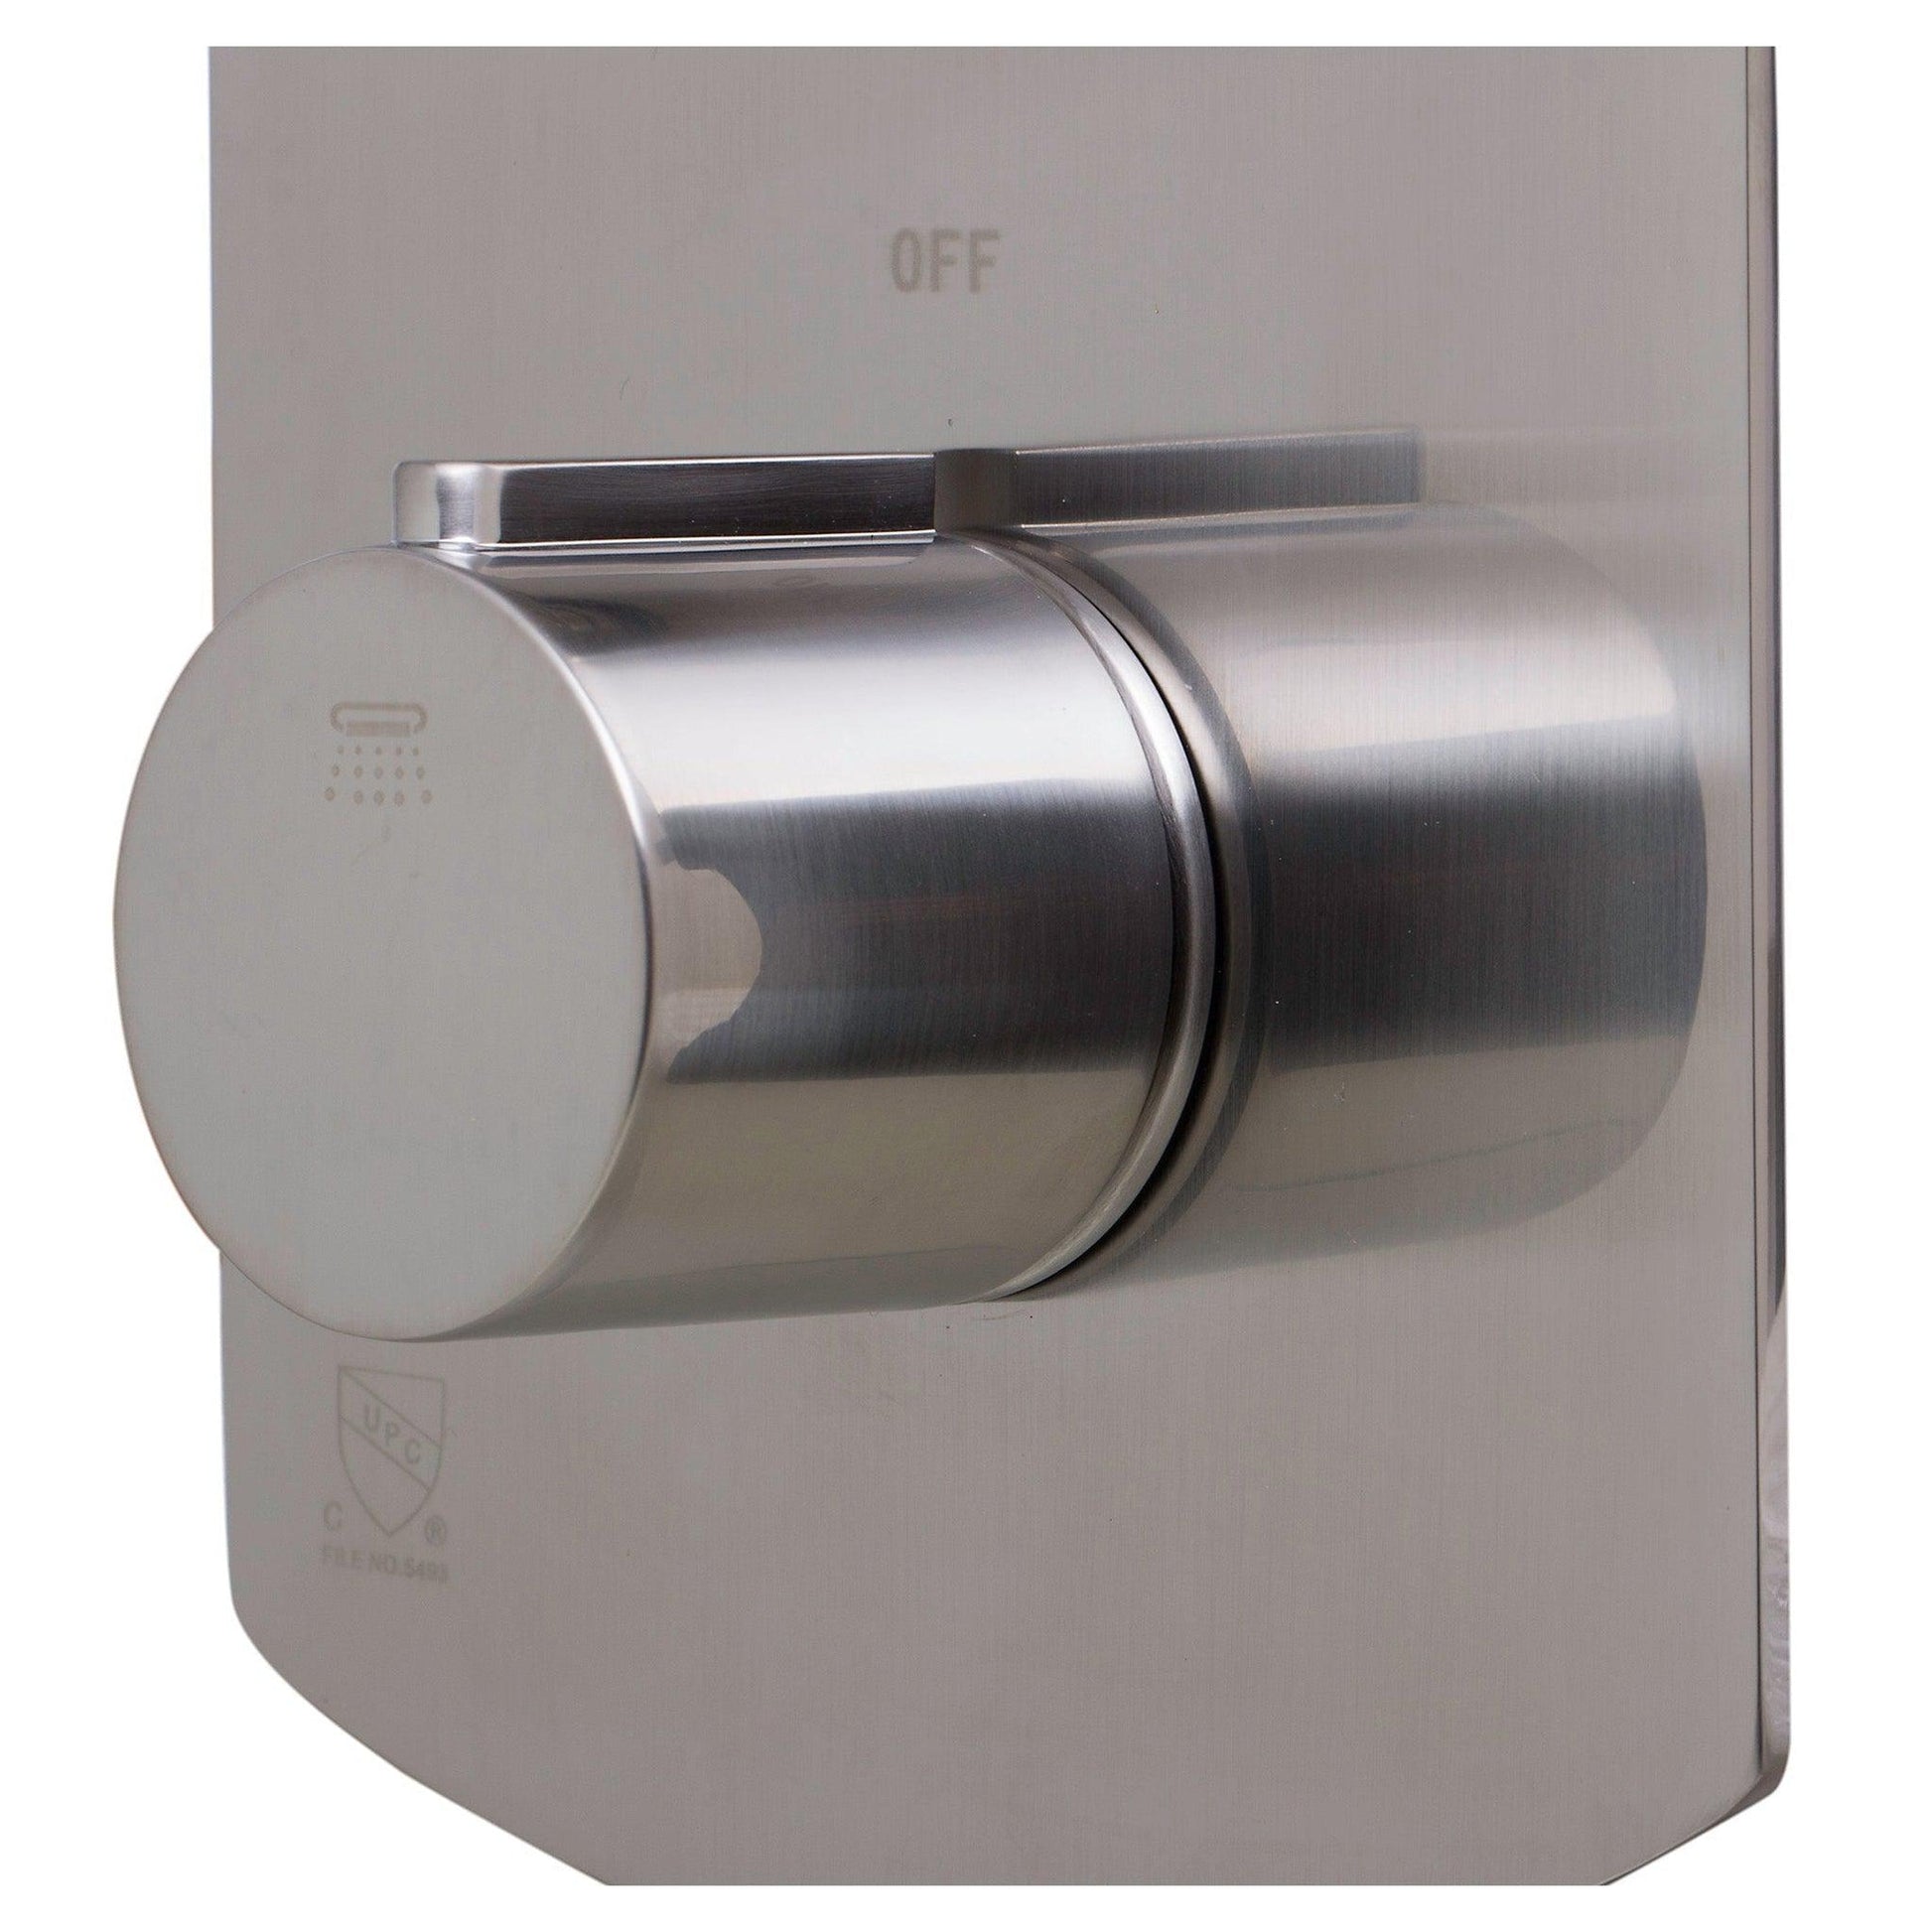 ALFI Brand AB4001-BN Brushed Nickel Concealed 3-Way Thermostatic Valve Shower Mixer Round Knobs